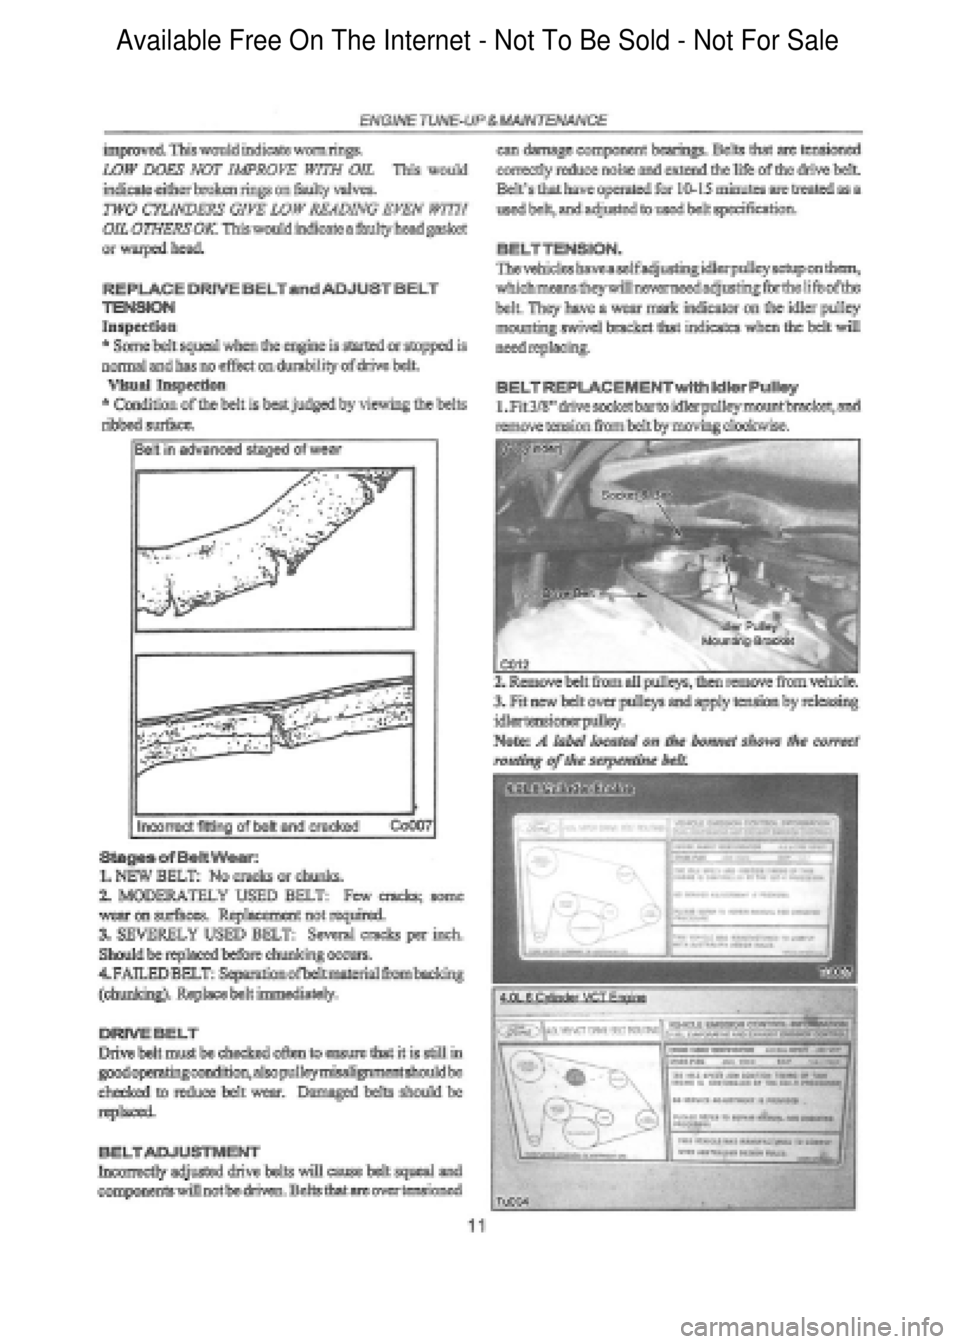 FORD FALCON 1998  Workshop Manual  Available Free On The Internet - Not To Be Sold - Not For Sale    